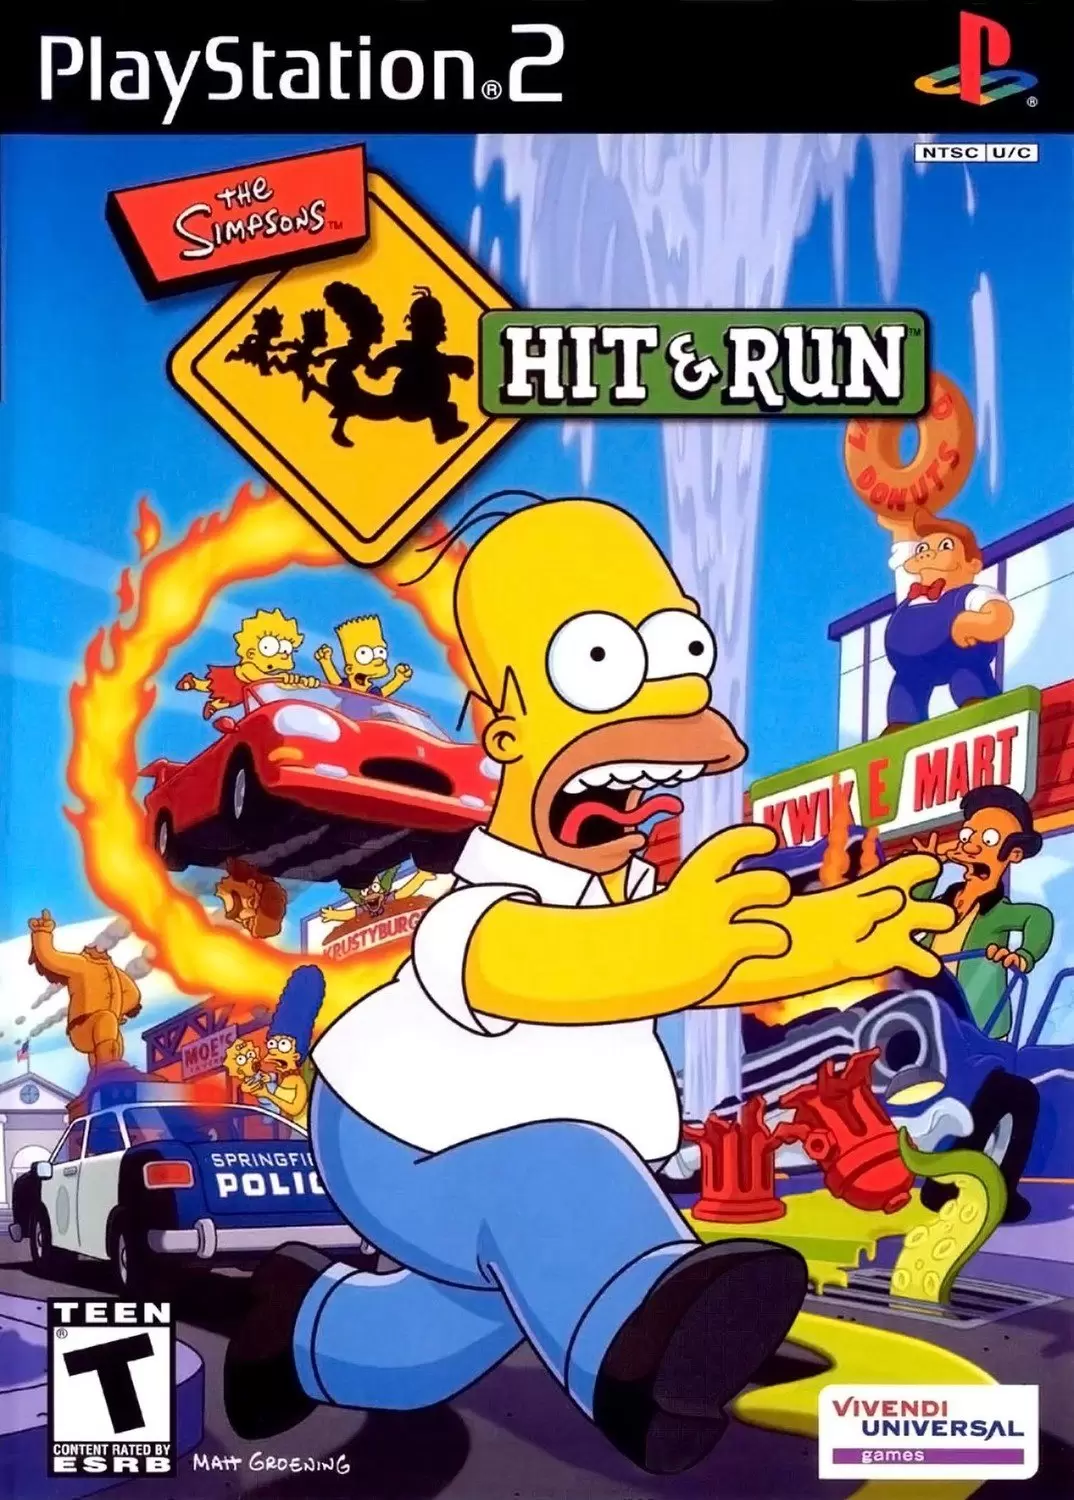 PS2 Games - The Simpsons - Hit & Run